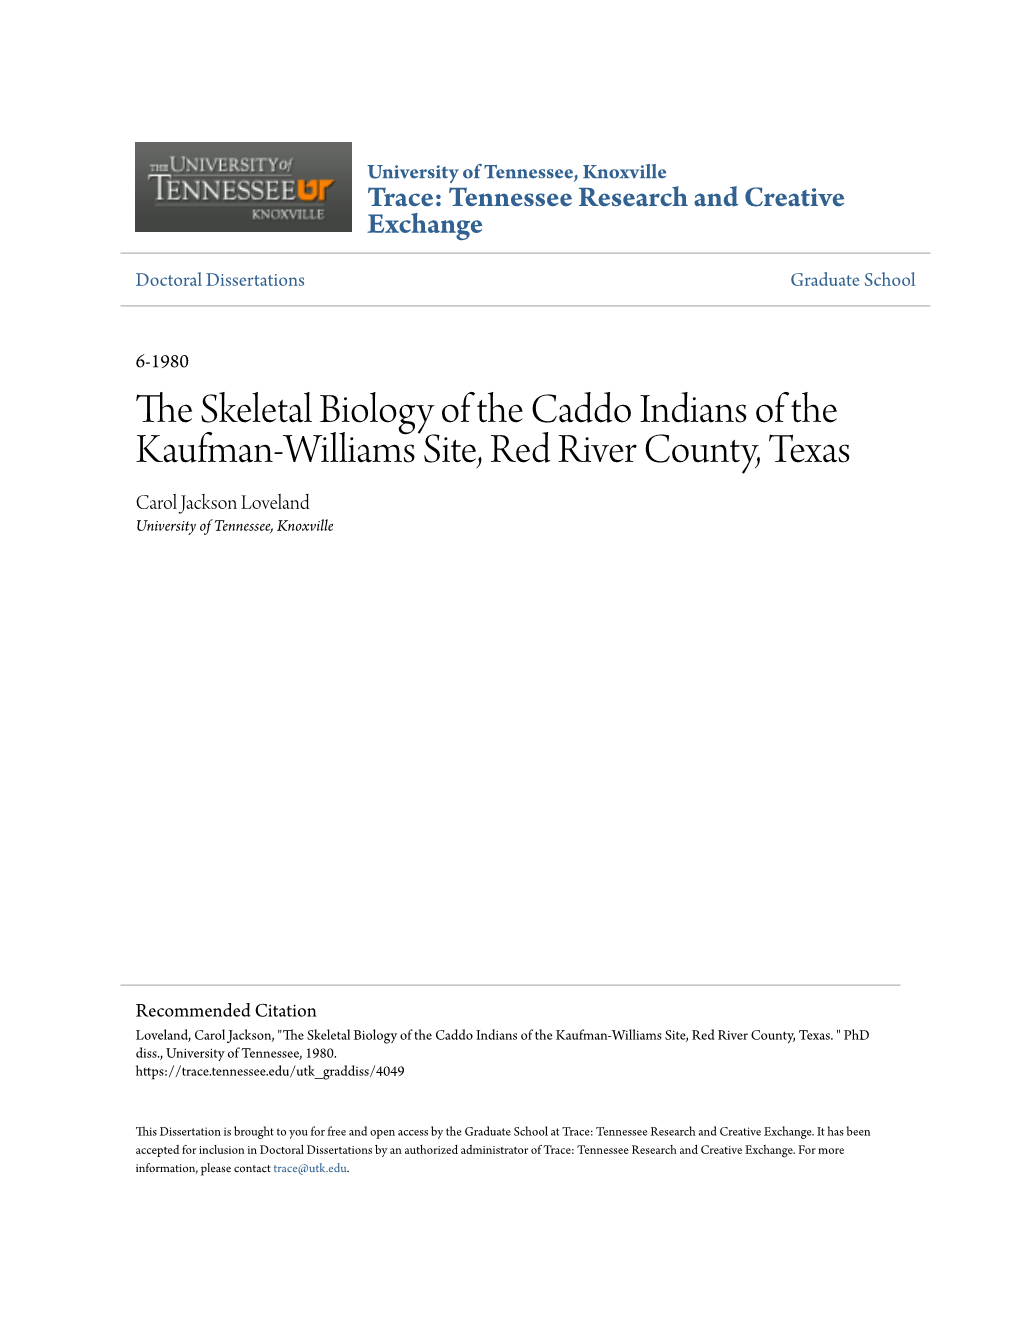 The Skeletal Biology of the Caddo Indians of the Kaufman-Williams Site, Red River County, Texas